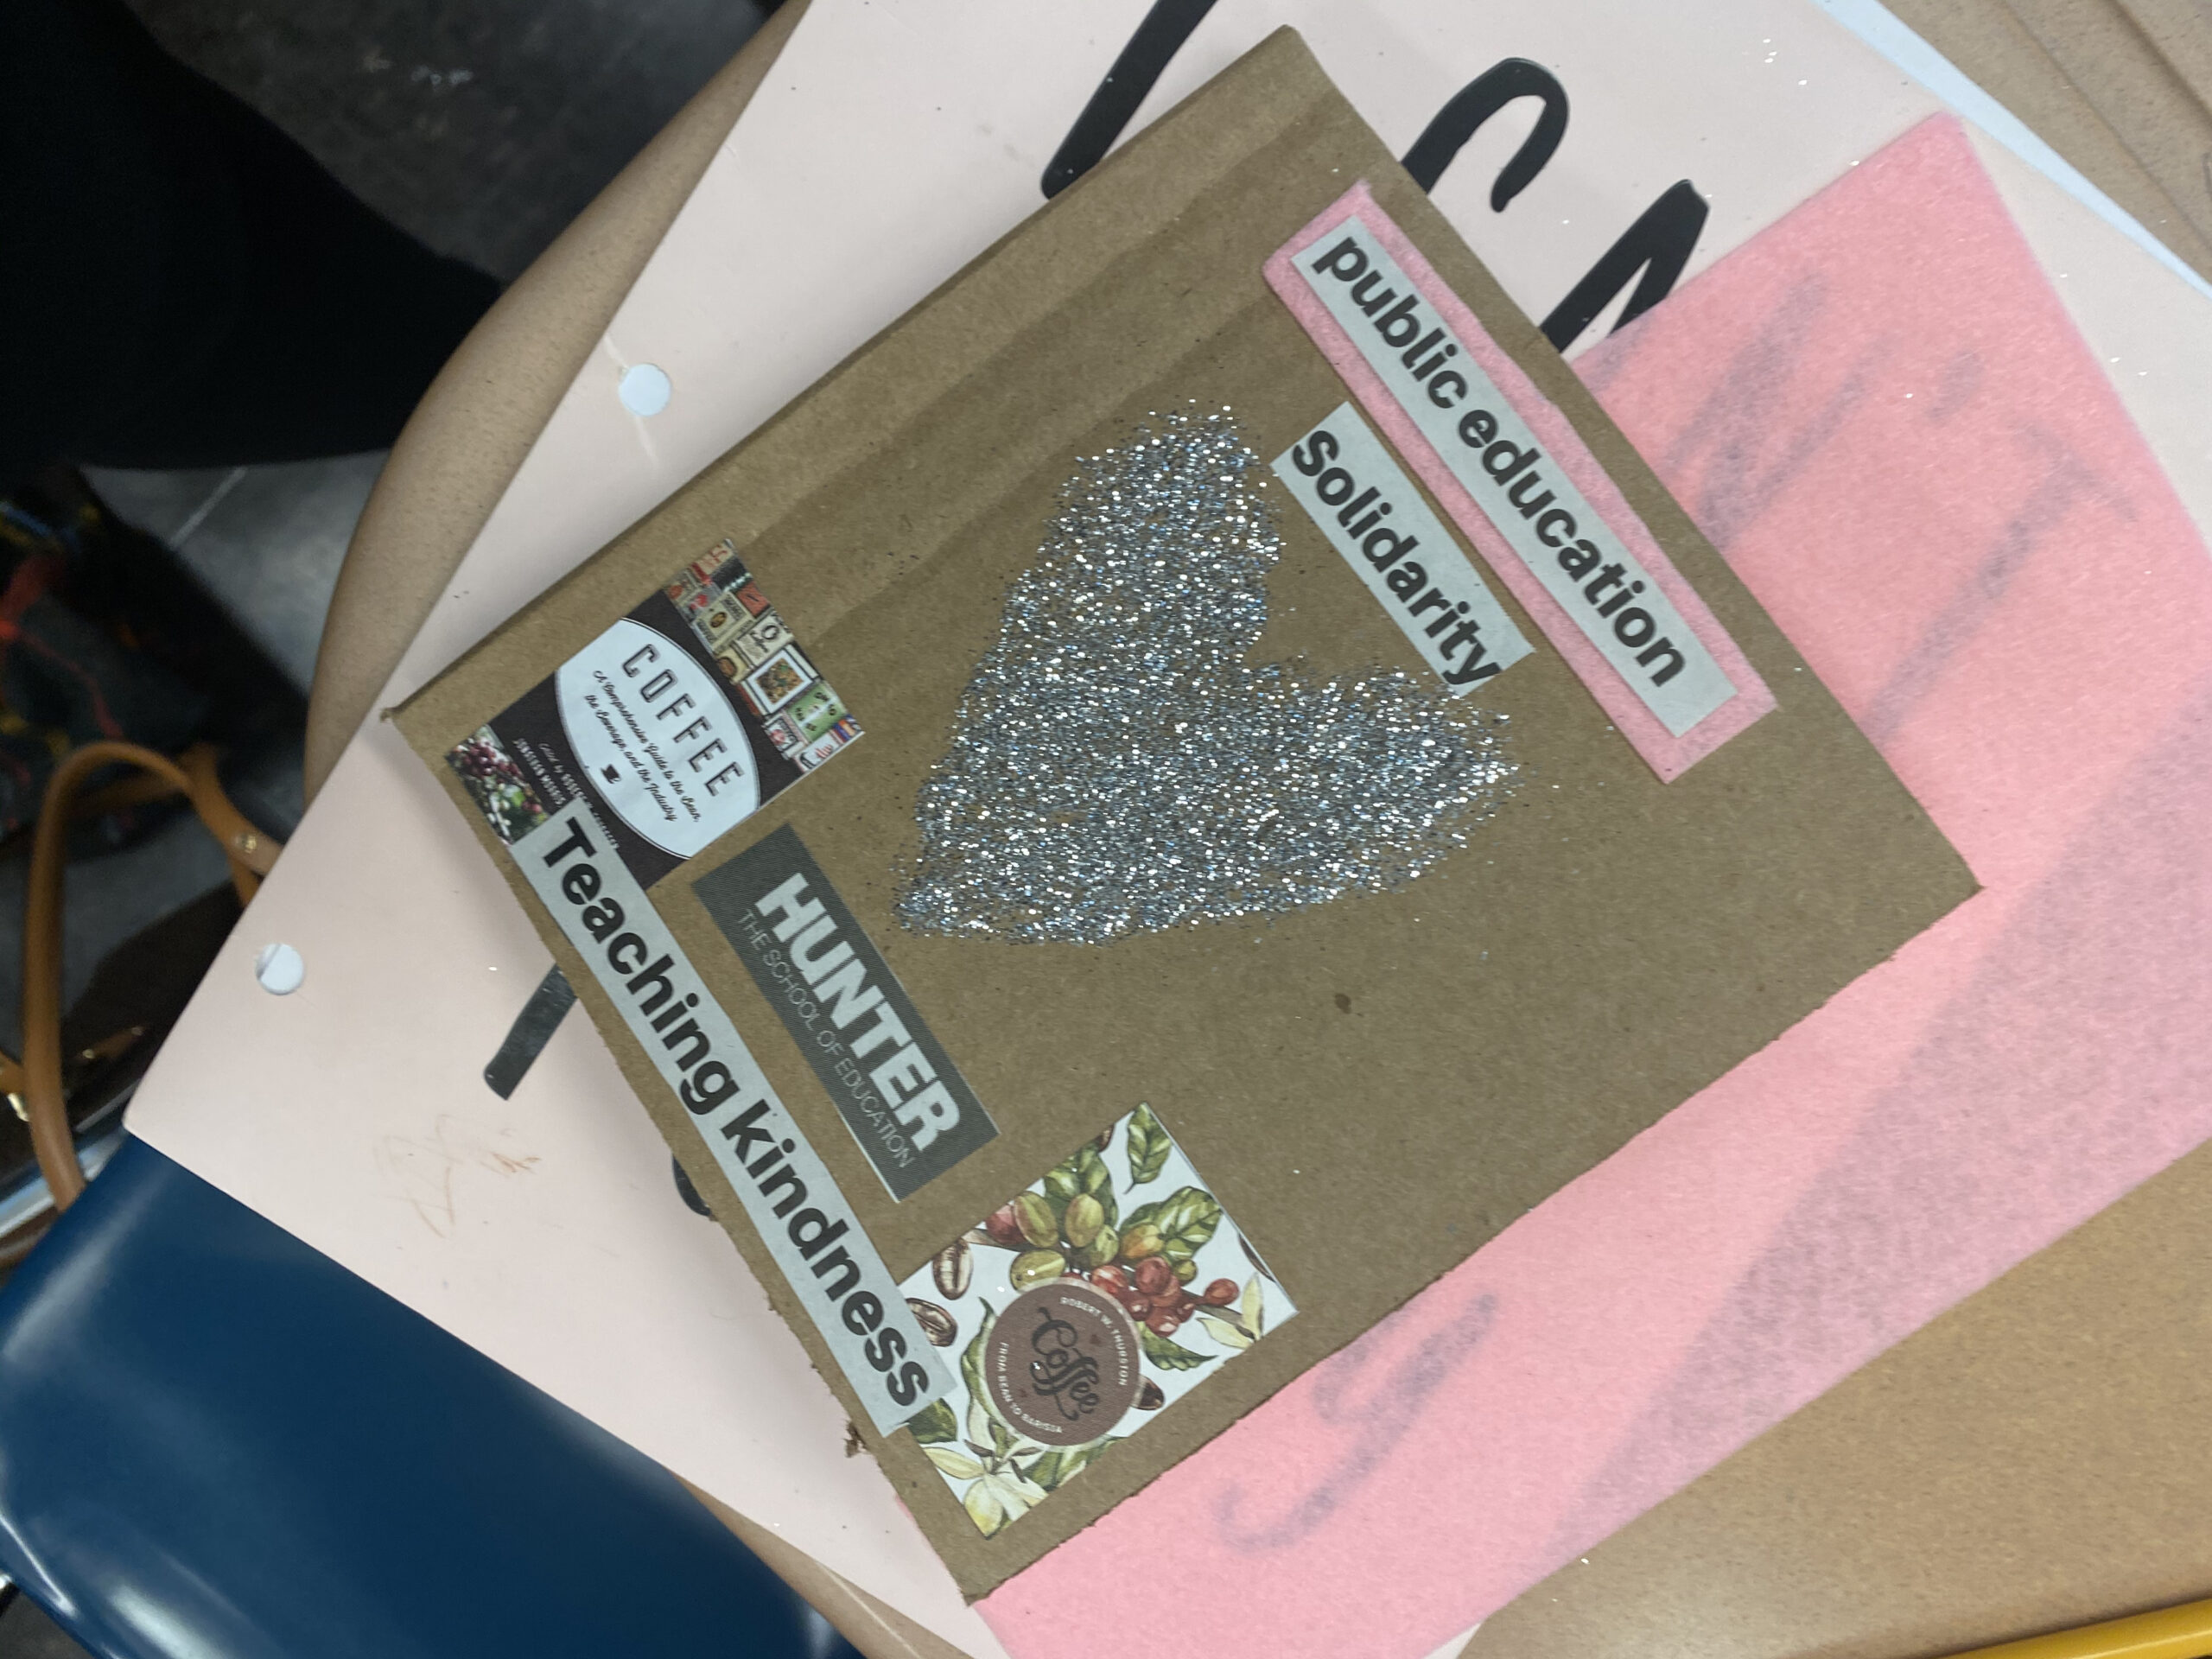 a cartonera book cover featuring a silver glitter heart, coffee shop business cards, the Hunter College logo, and the phrases "public education," "solidarity," and "Teaching kindness"